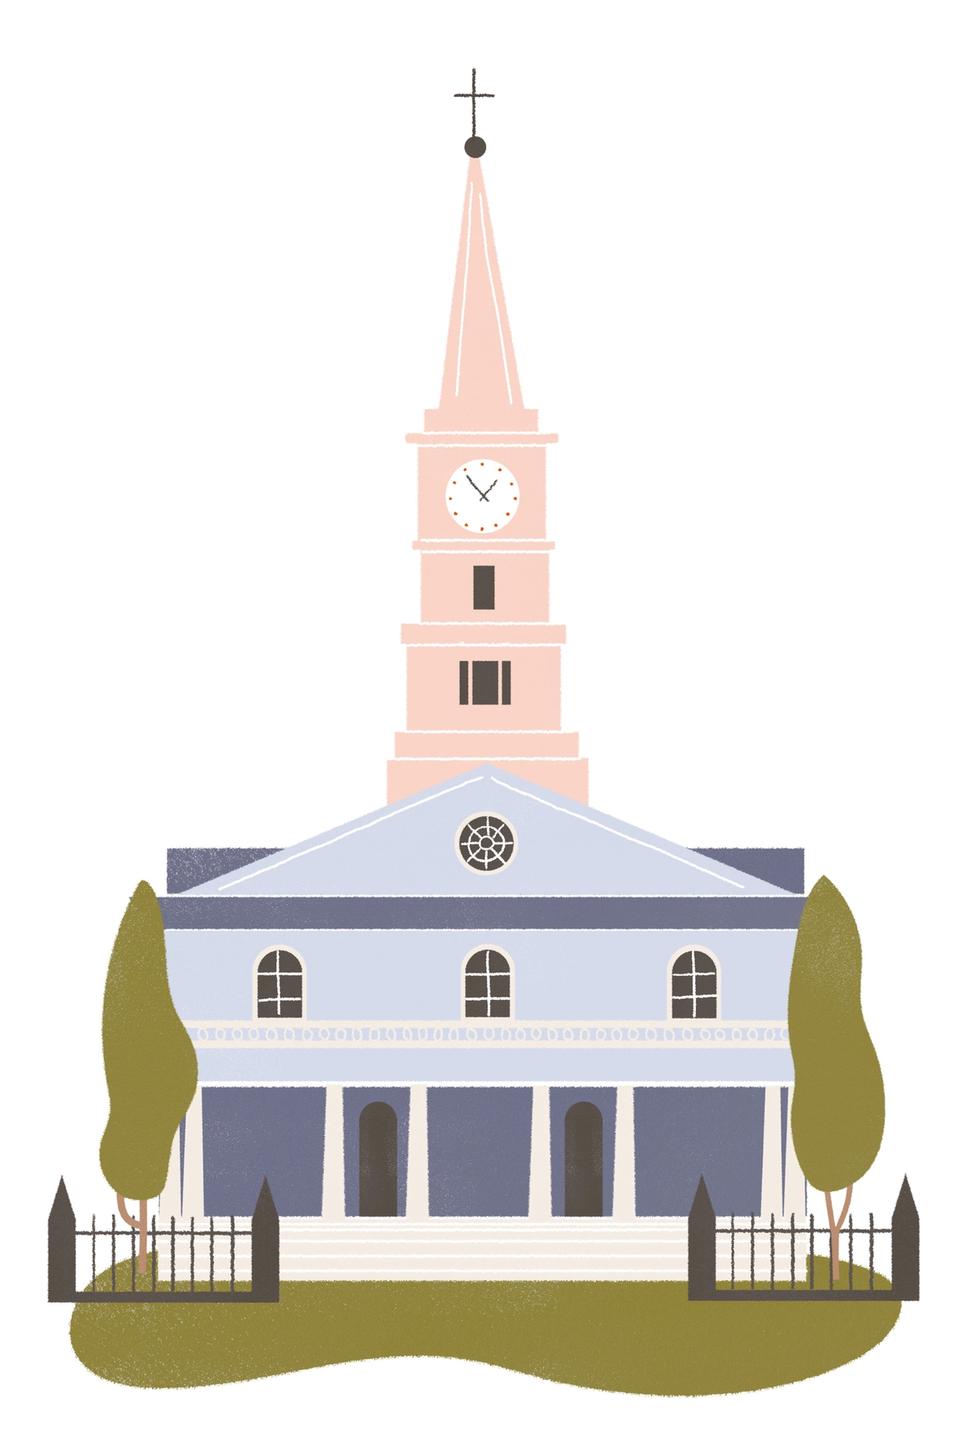 Illustration of the St. Mark's-in-the-Bowery church building in New York representing Colonial / Neo-Colonial style of architecture